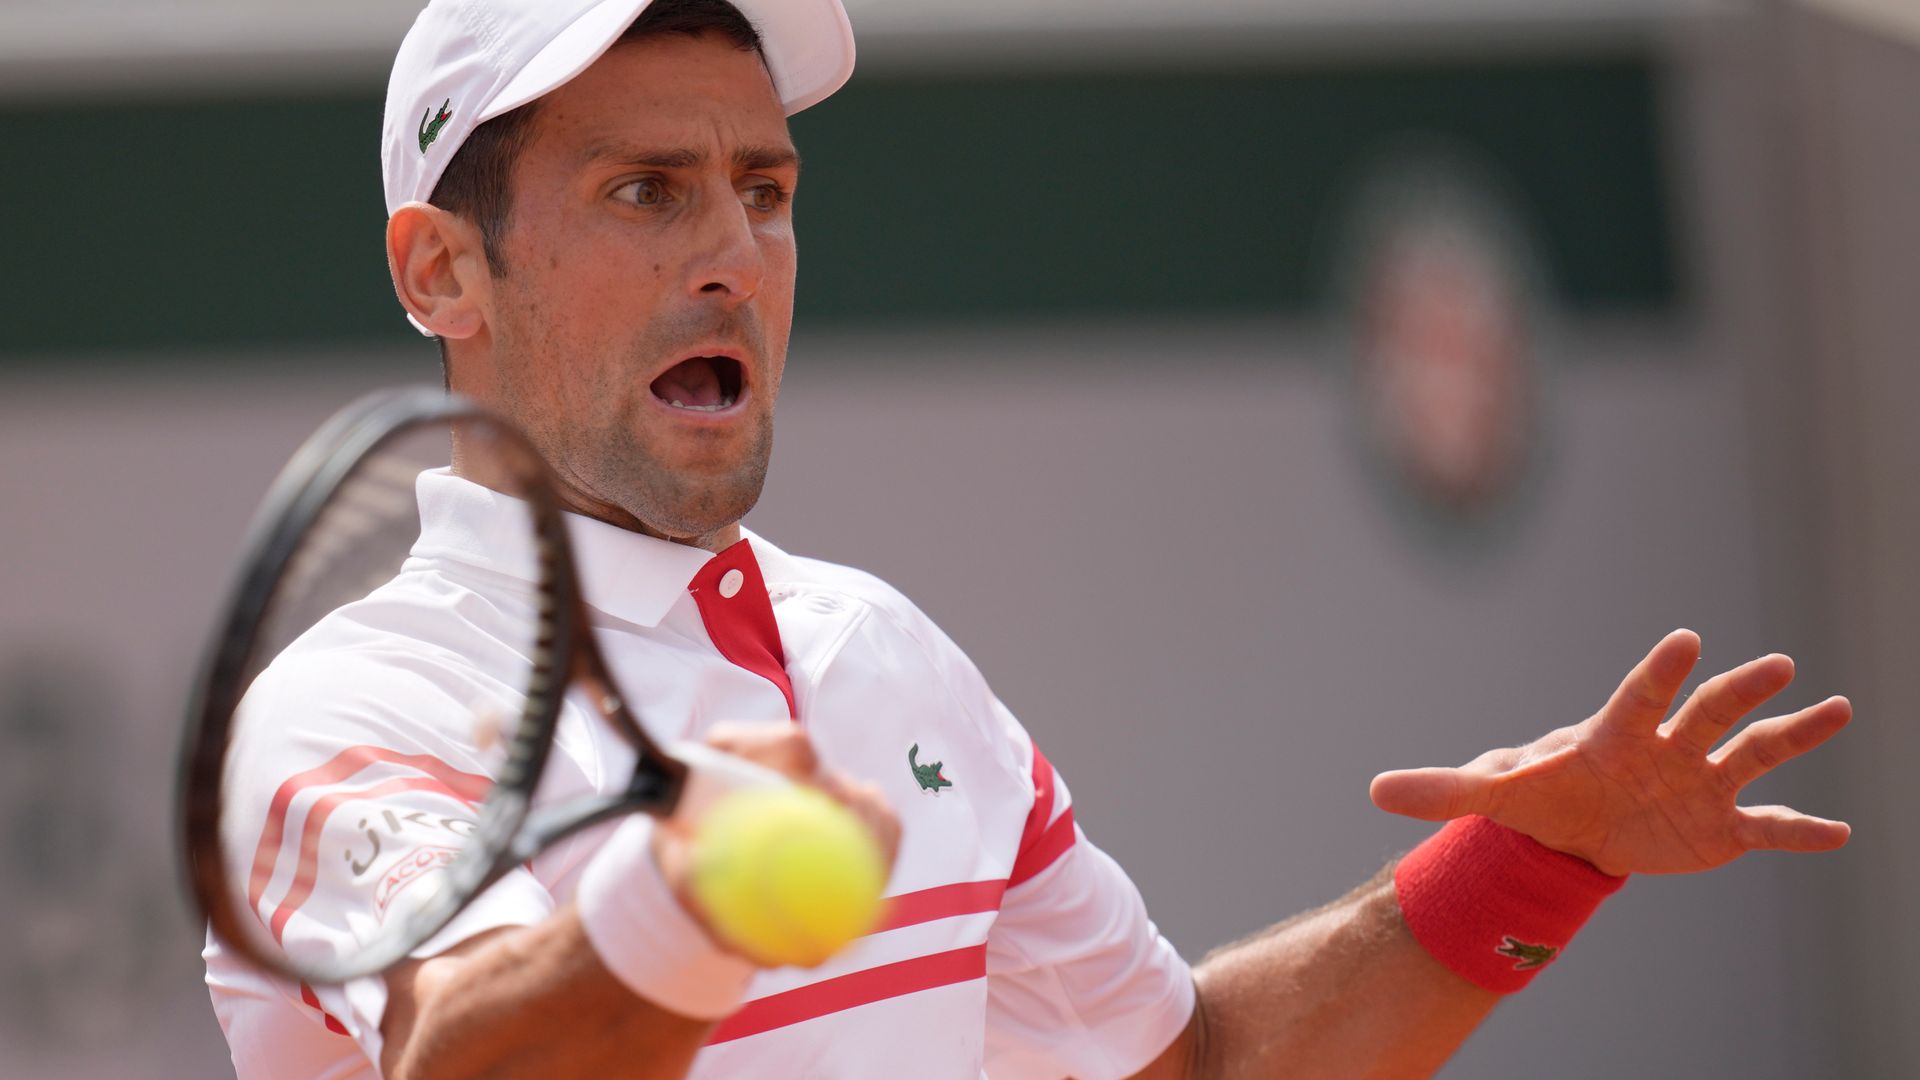 French Open: Latest scores